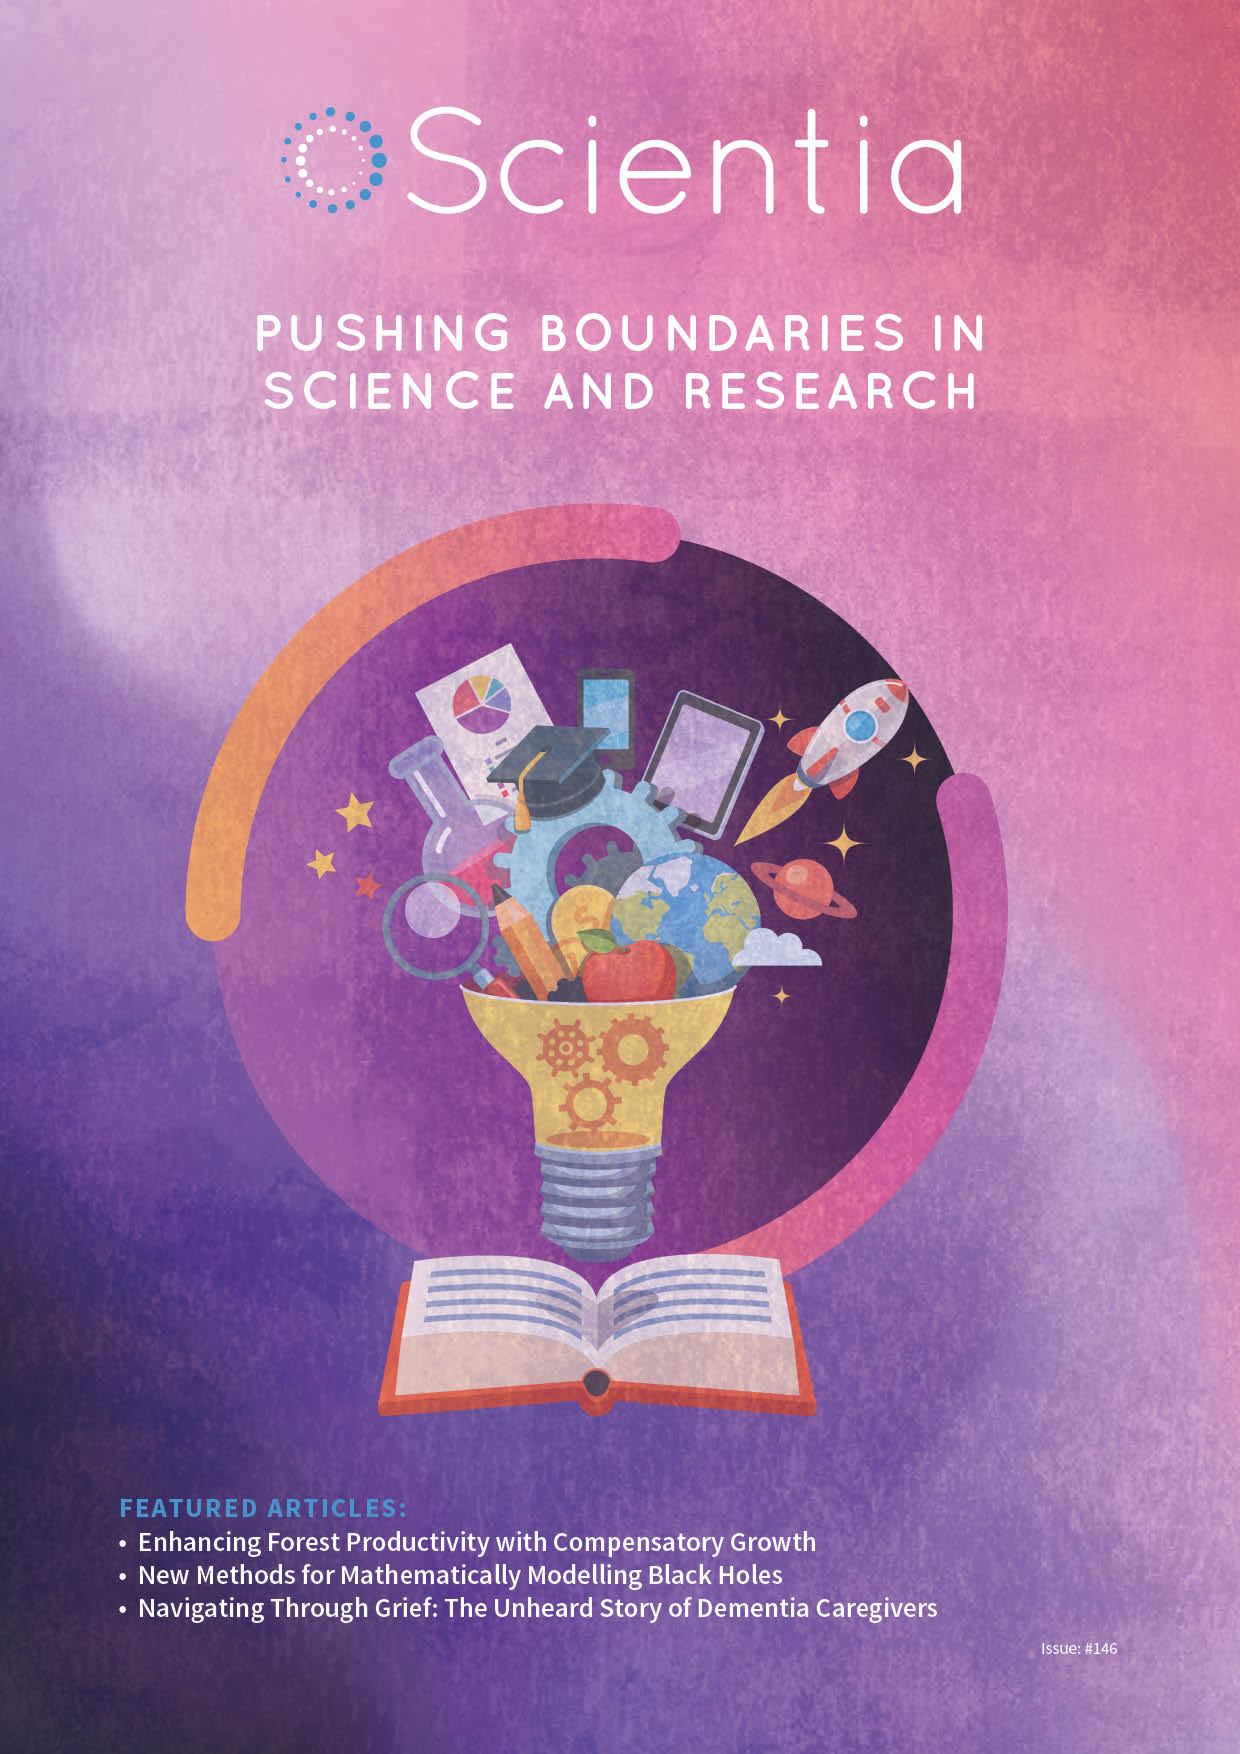 Scientia Issue #146 | Pushing Boundaries in Science and Research